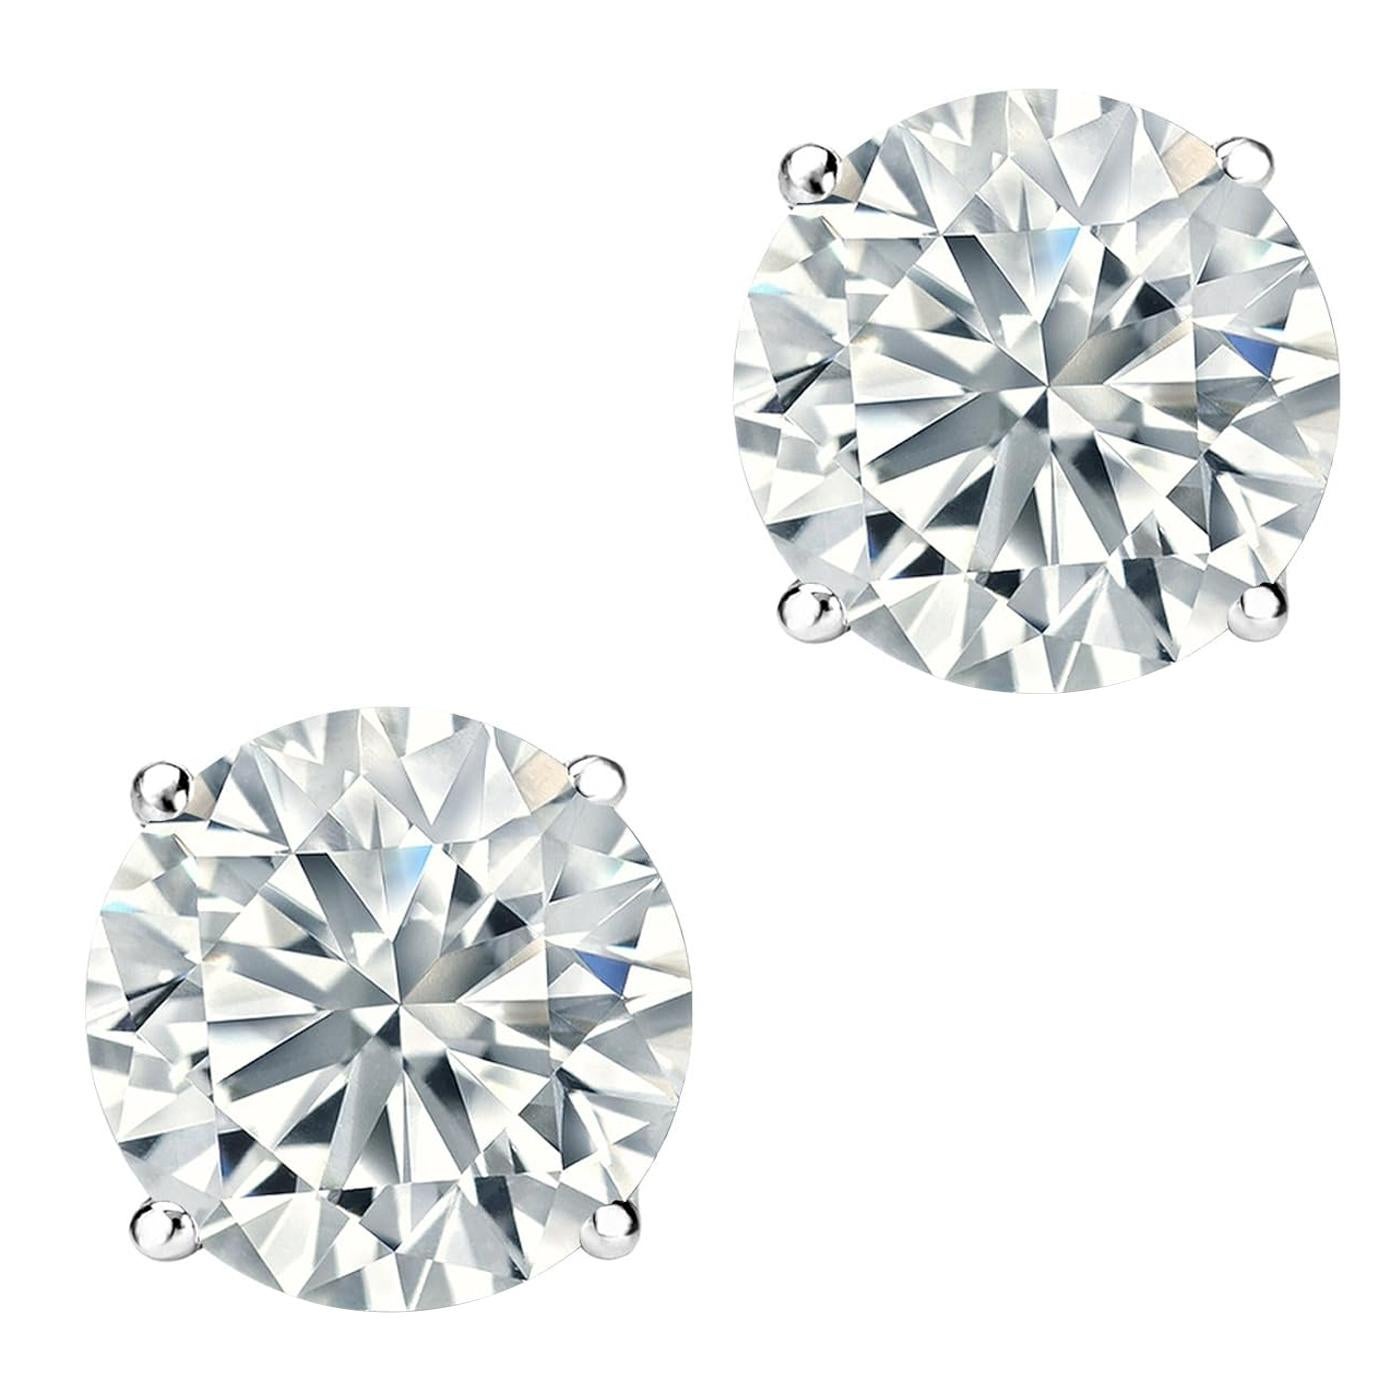 Captivate her with the stunning and dazzling look of these 4 prong basket-setting natural diamond earrings. Beautifully crafted in Platinum, these gorgeous diamond earrings feature 1.05ct / 1.04ct round cut diamonds on each Earring, with I/H color